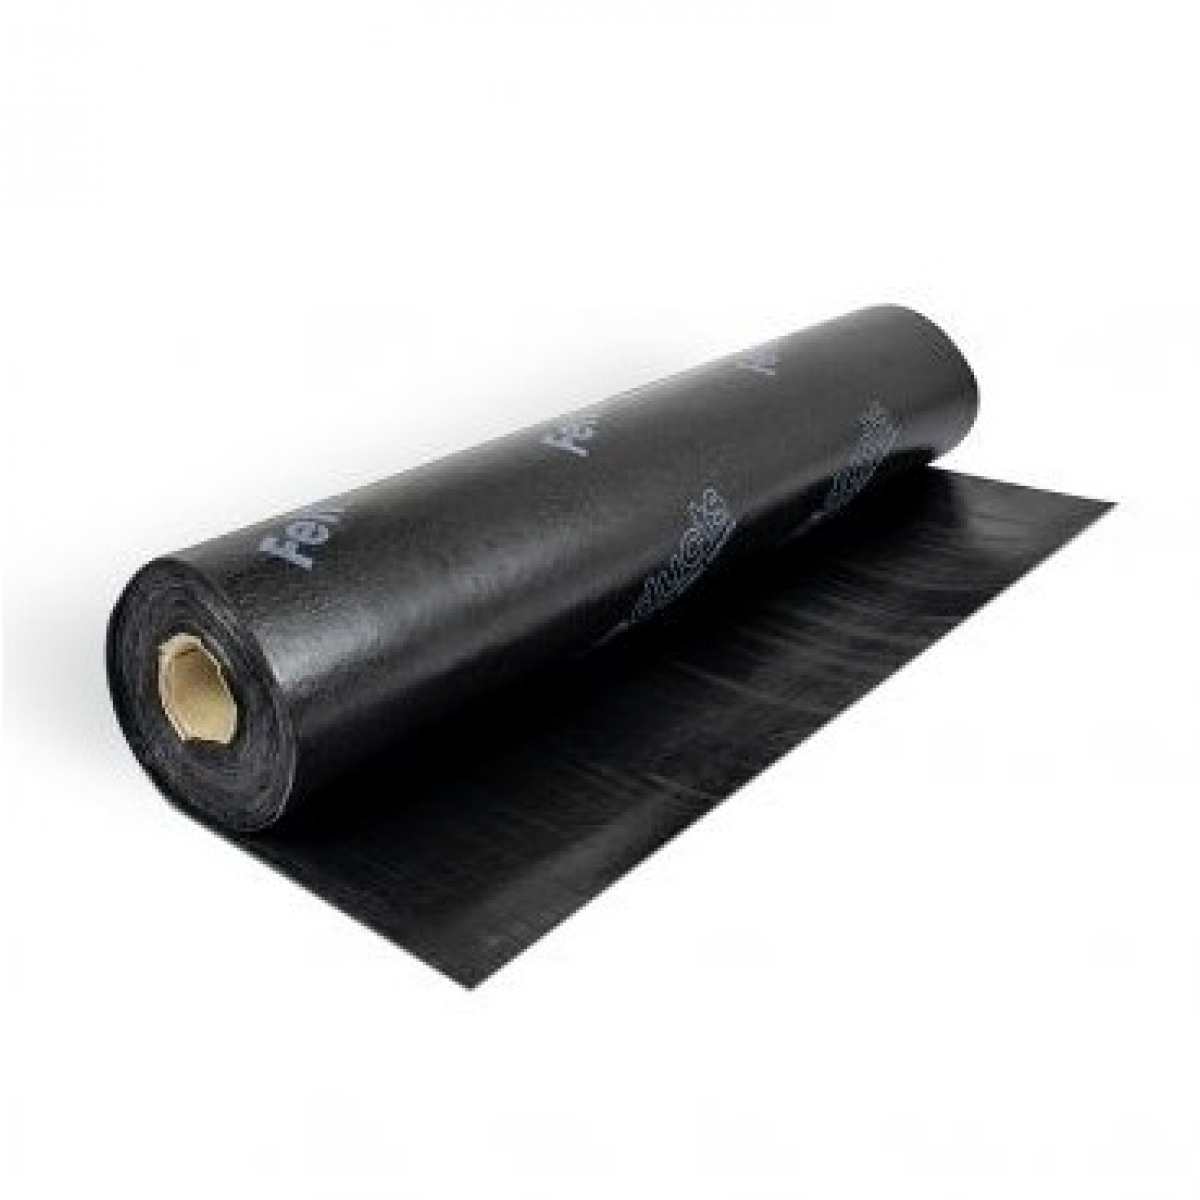 supatec torch on film underlay 1 Image by Websters Timber